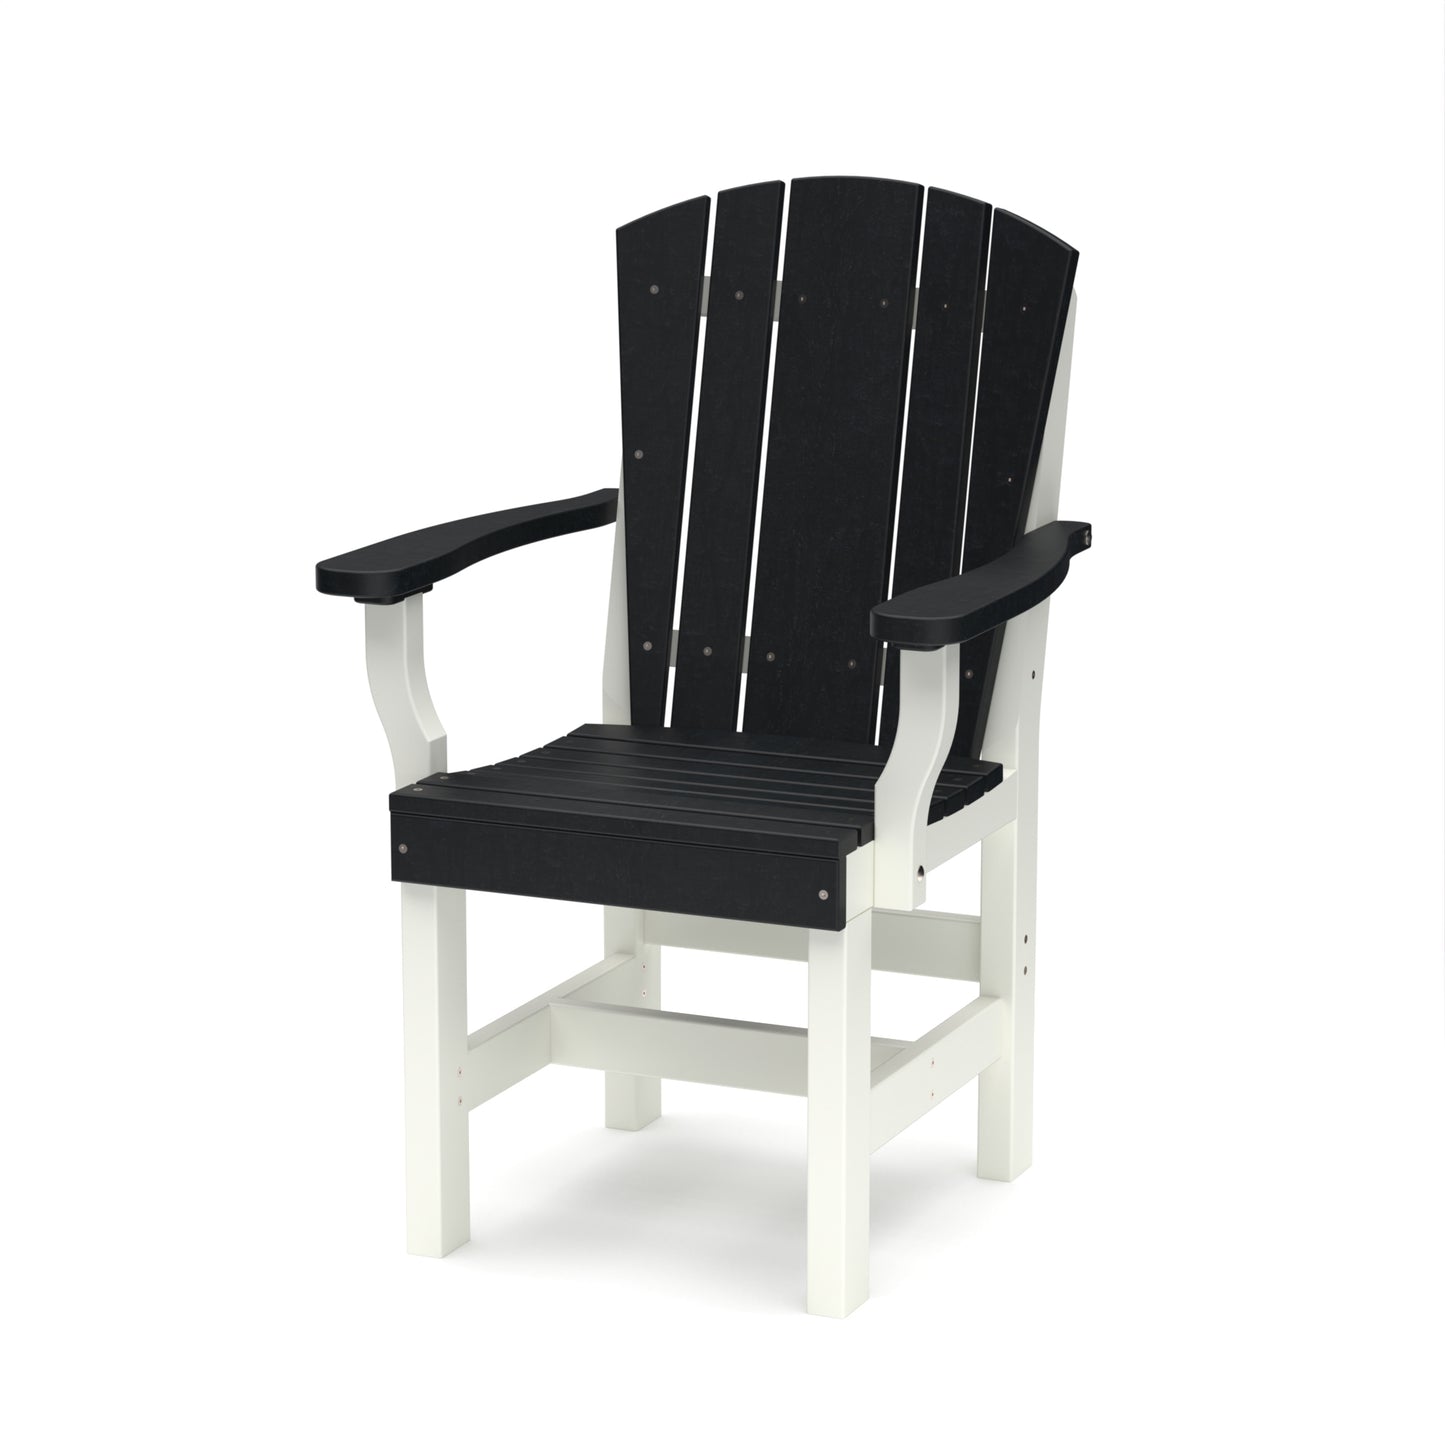 Wildridge Recycled Plastic Heritage Outdoor Dining Chair with Arms - LEAD TIME TO SHIP 4 WEEKS